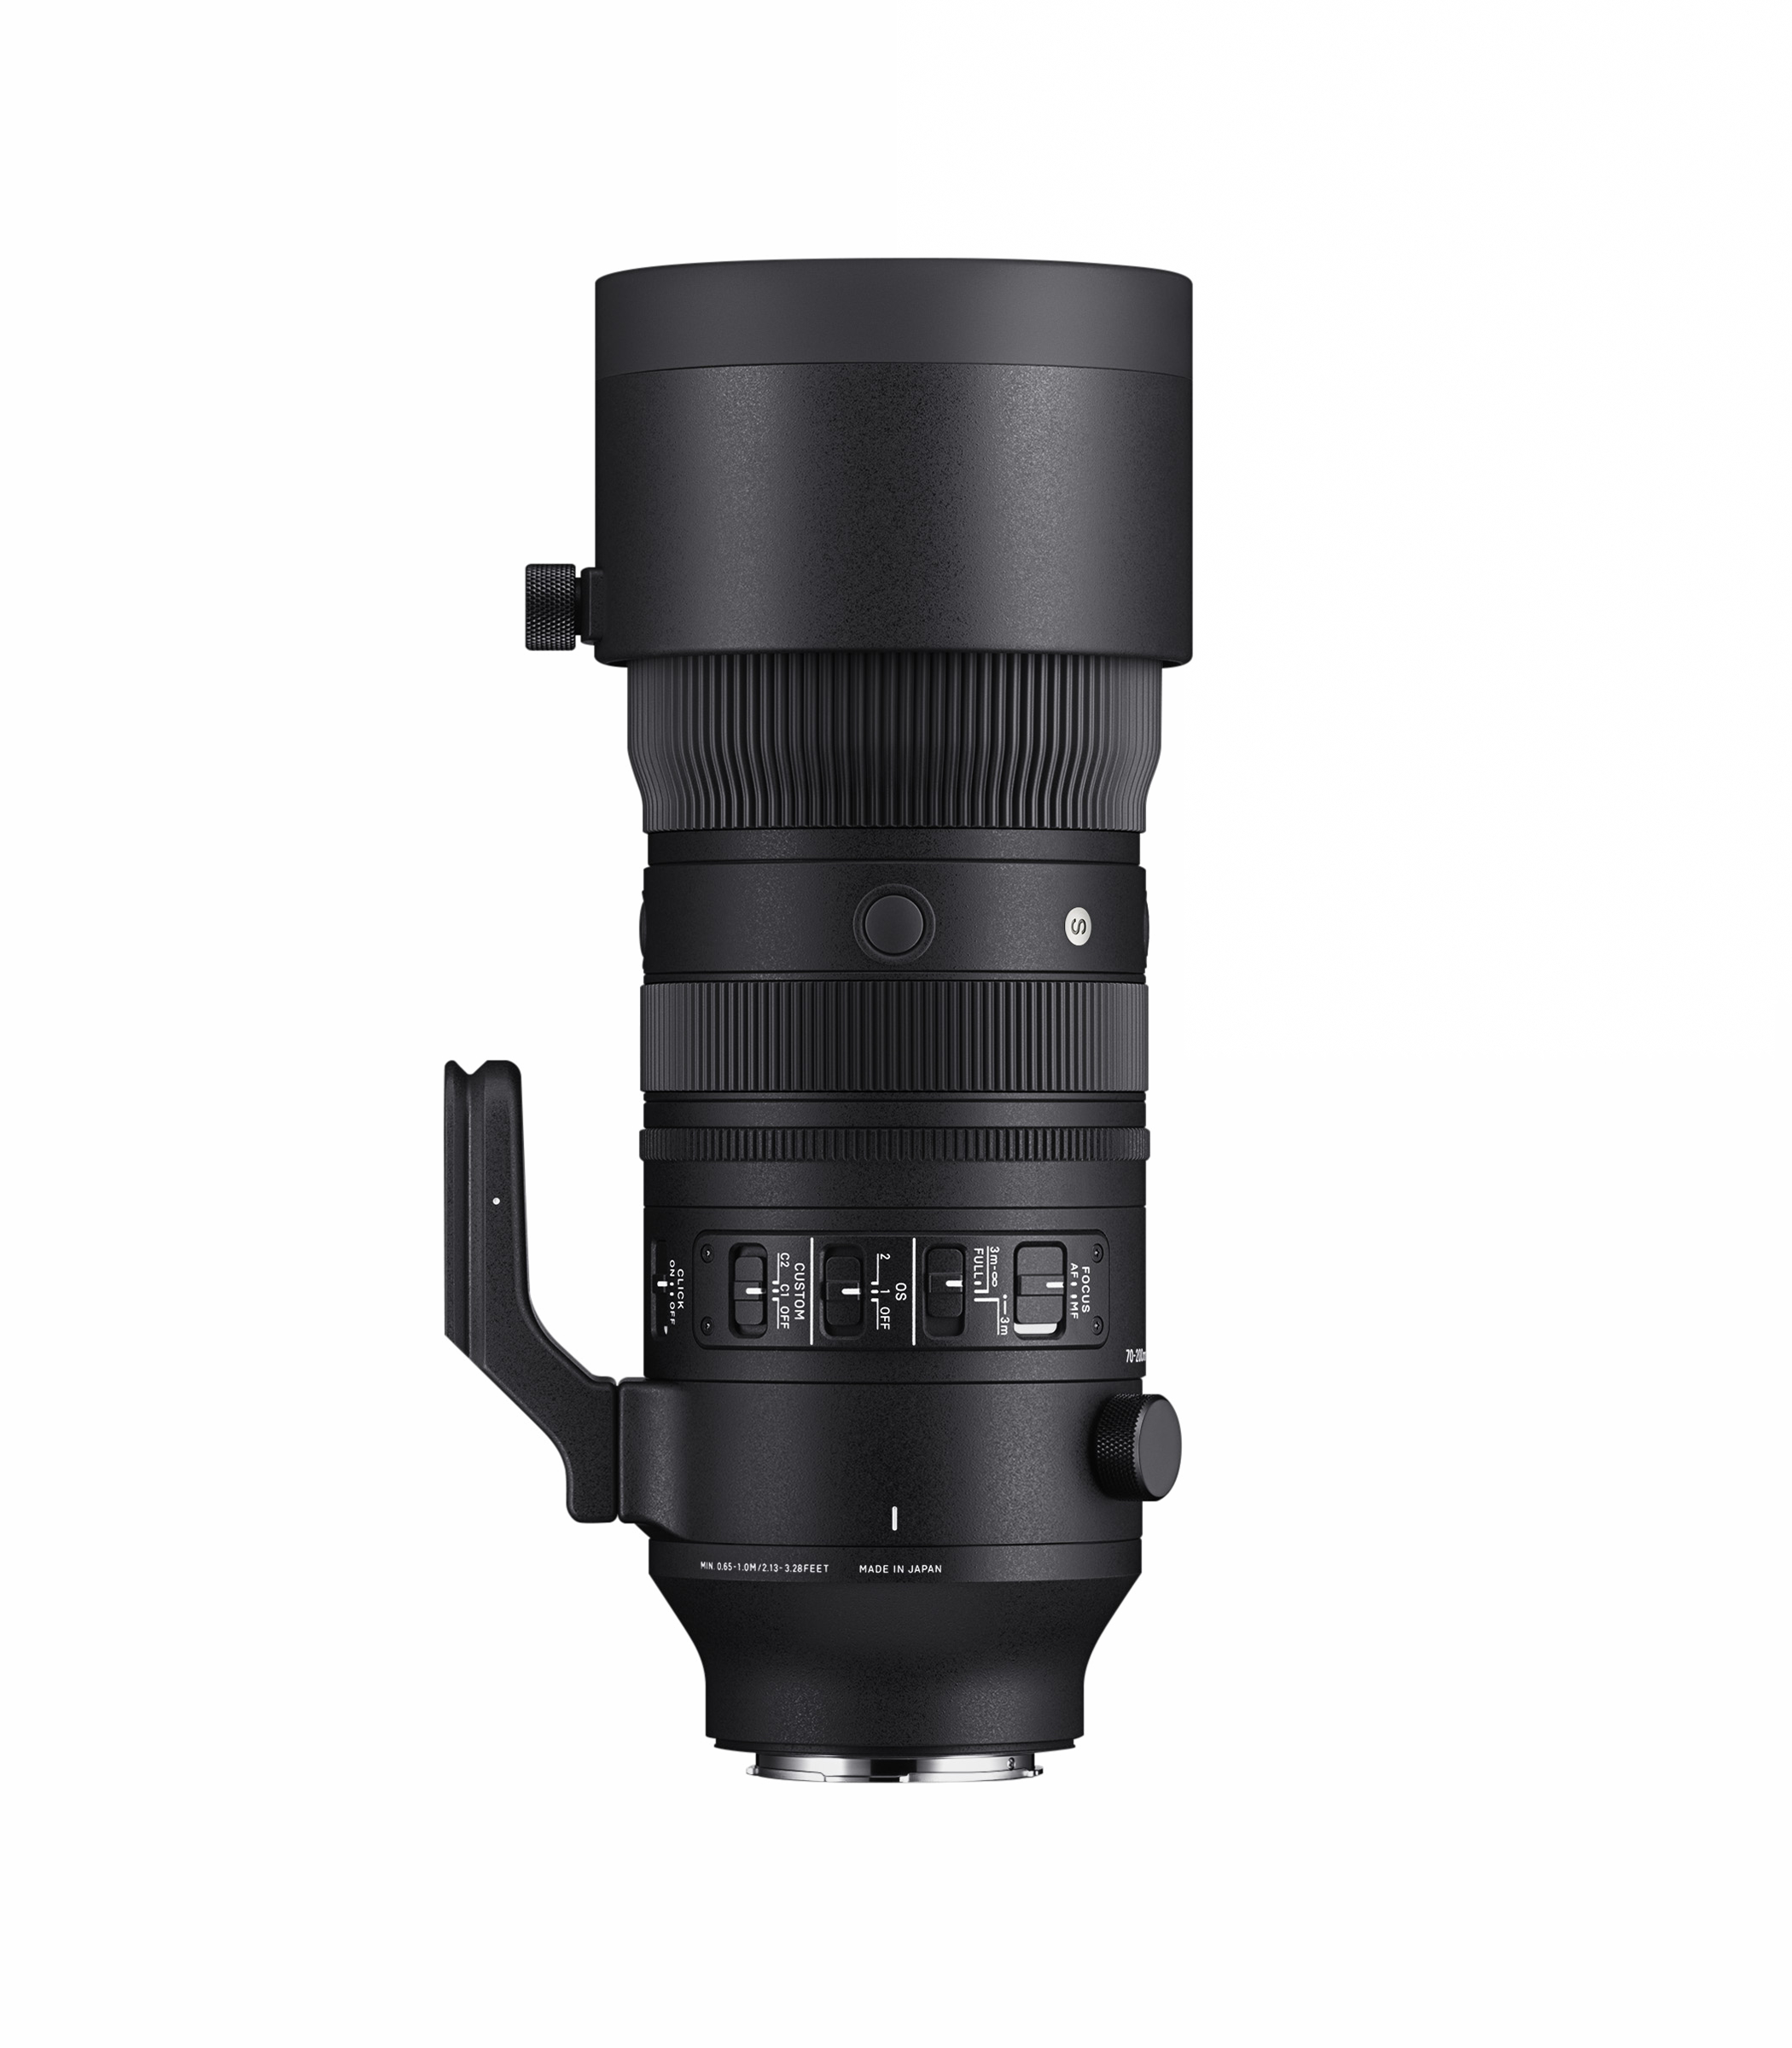 SIGMA 70-200mm F2.8 DG DN OS Sports - Switches